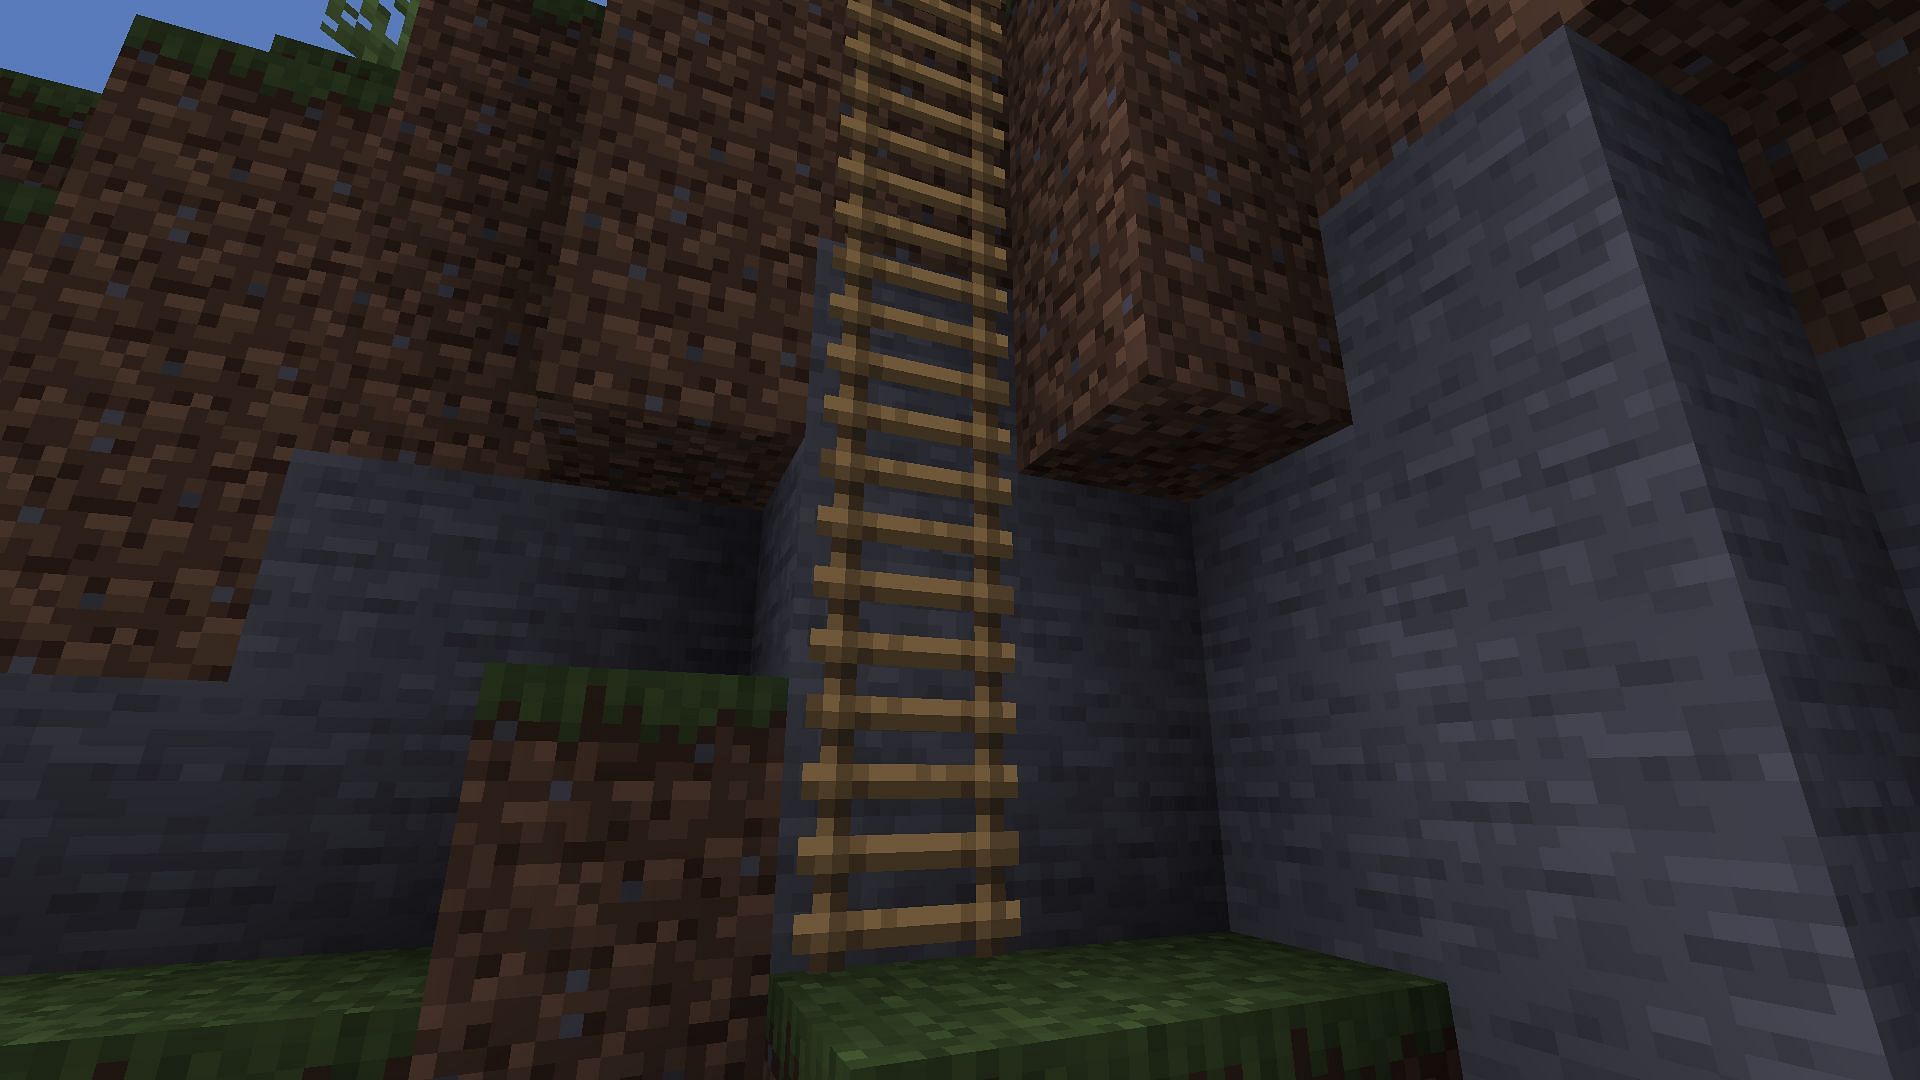 One Minecraft player used game art to envision new types of ladders (Image via Mojang)